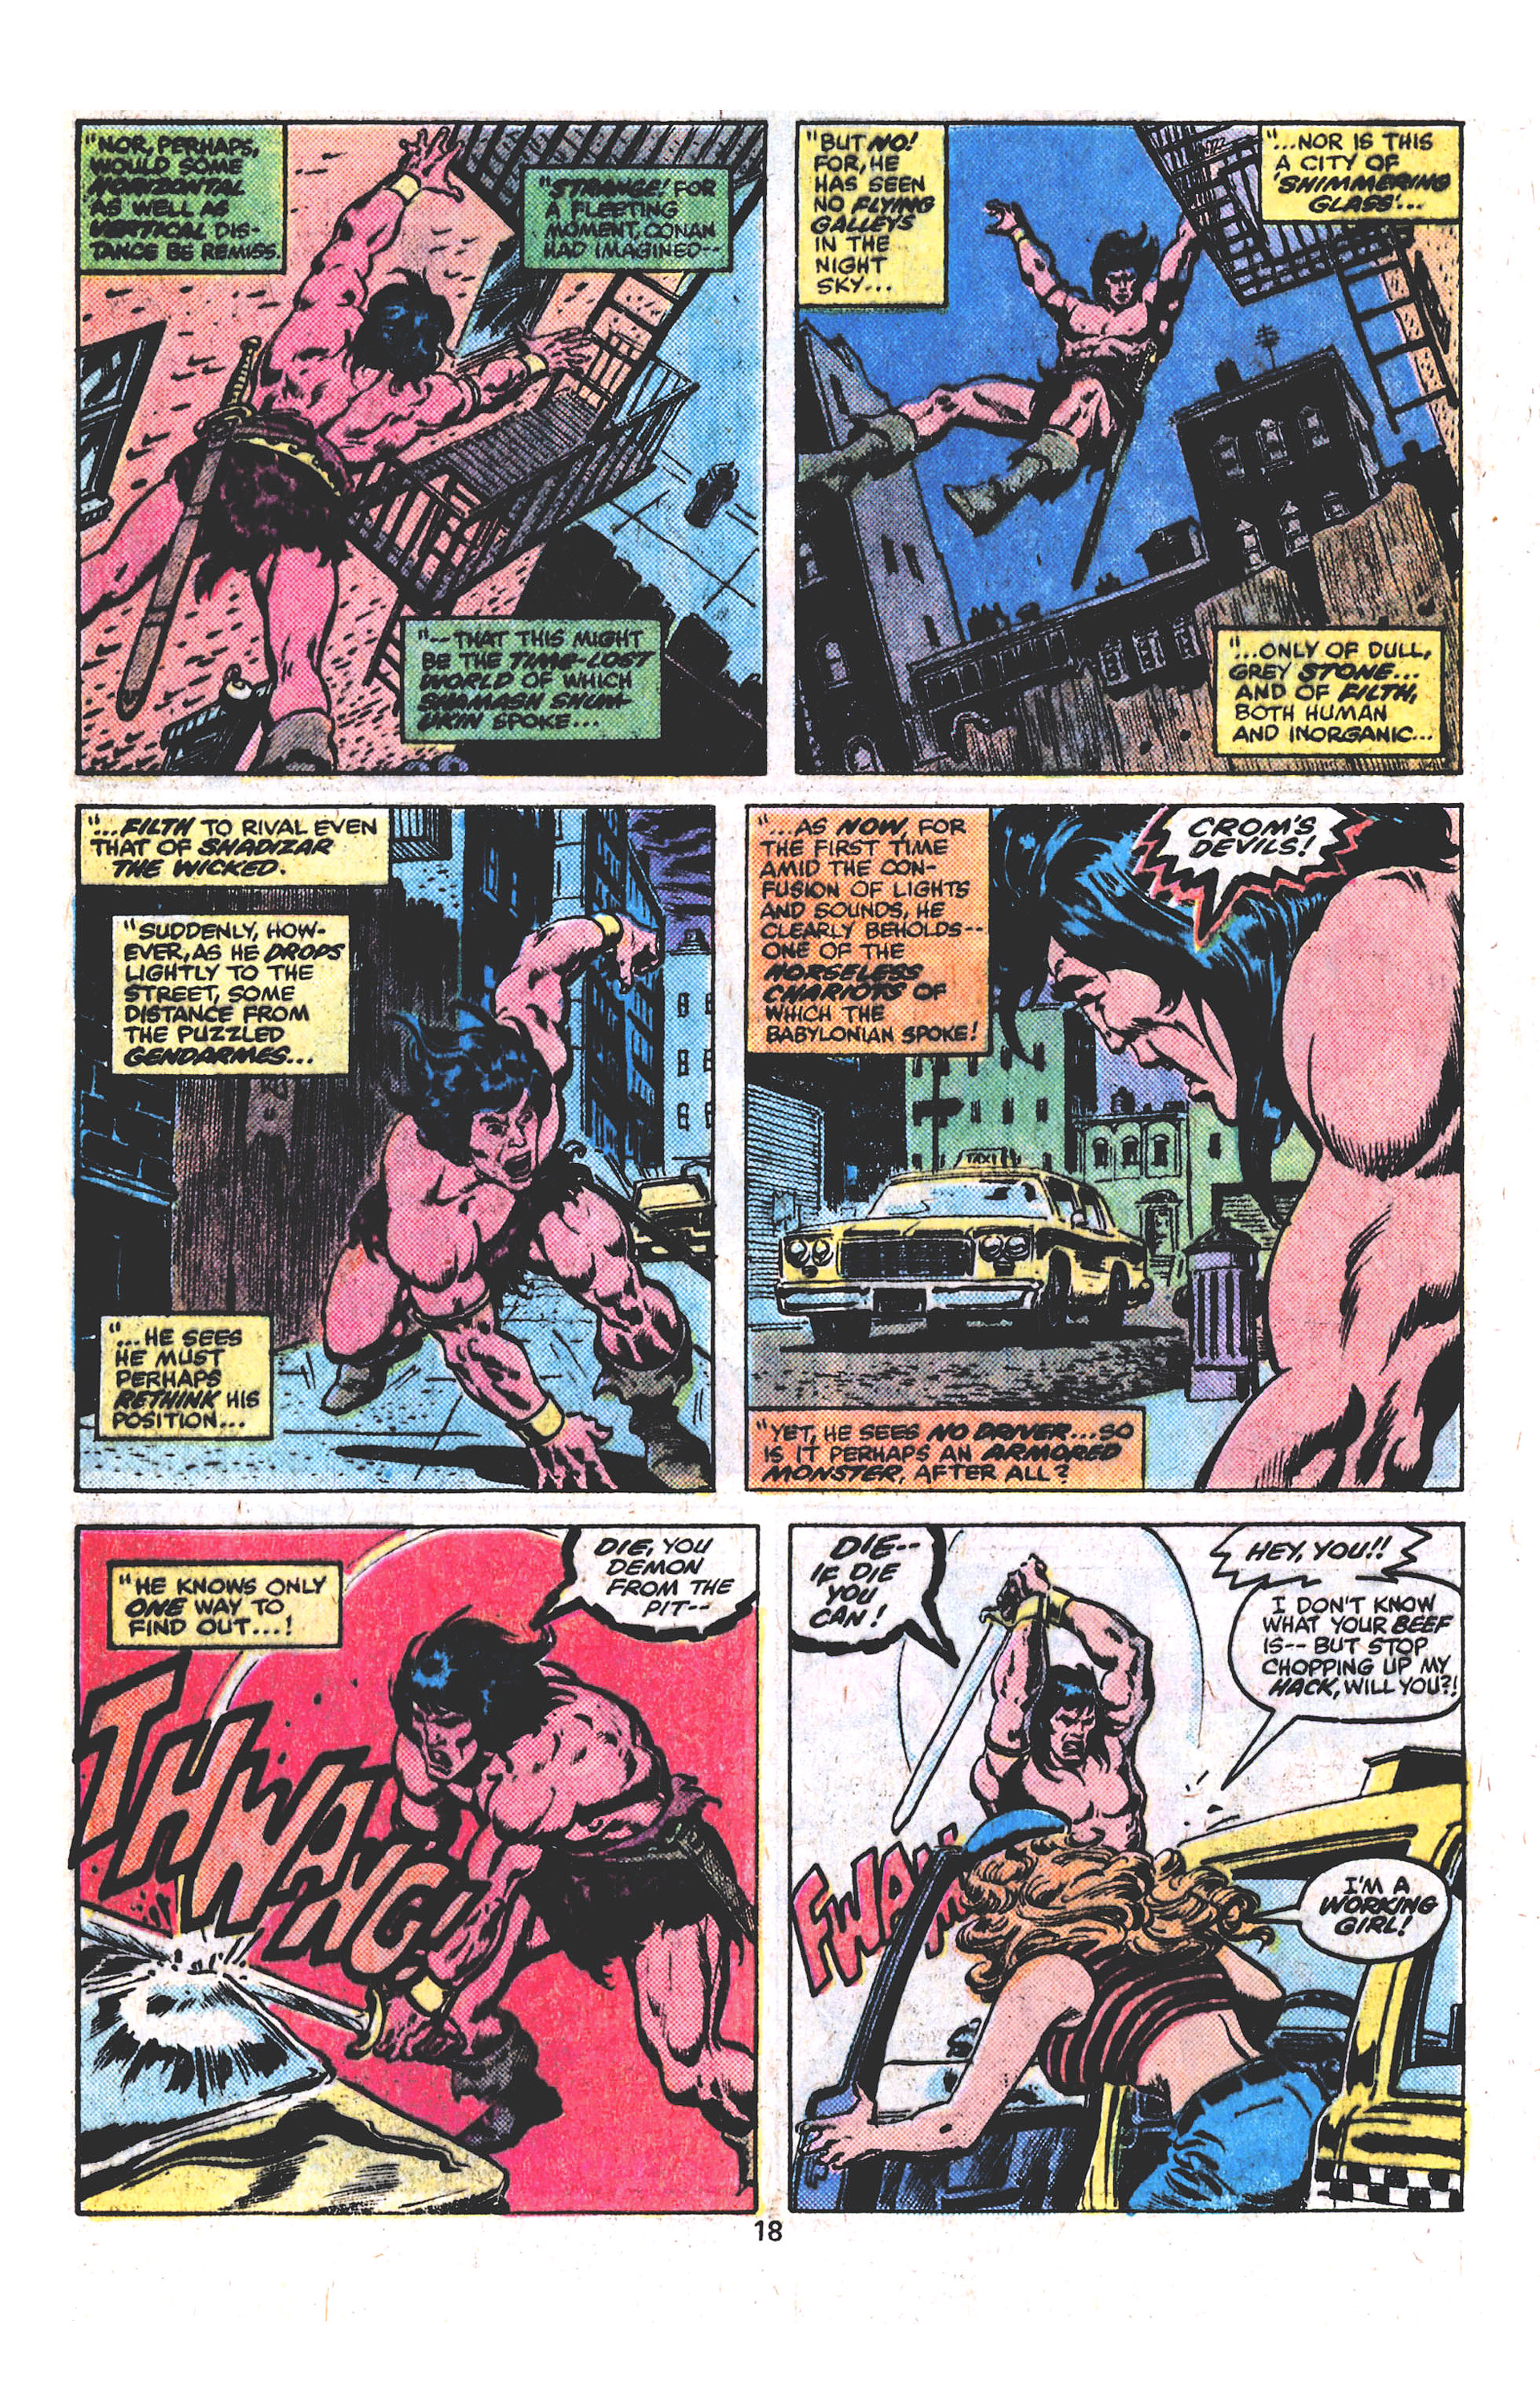 What If? (1977) Issue #13 - Conan The Barbarian walked the Earth Today #13 - English 15